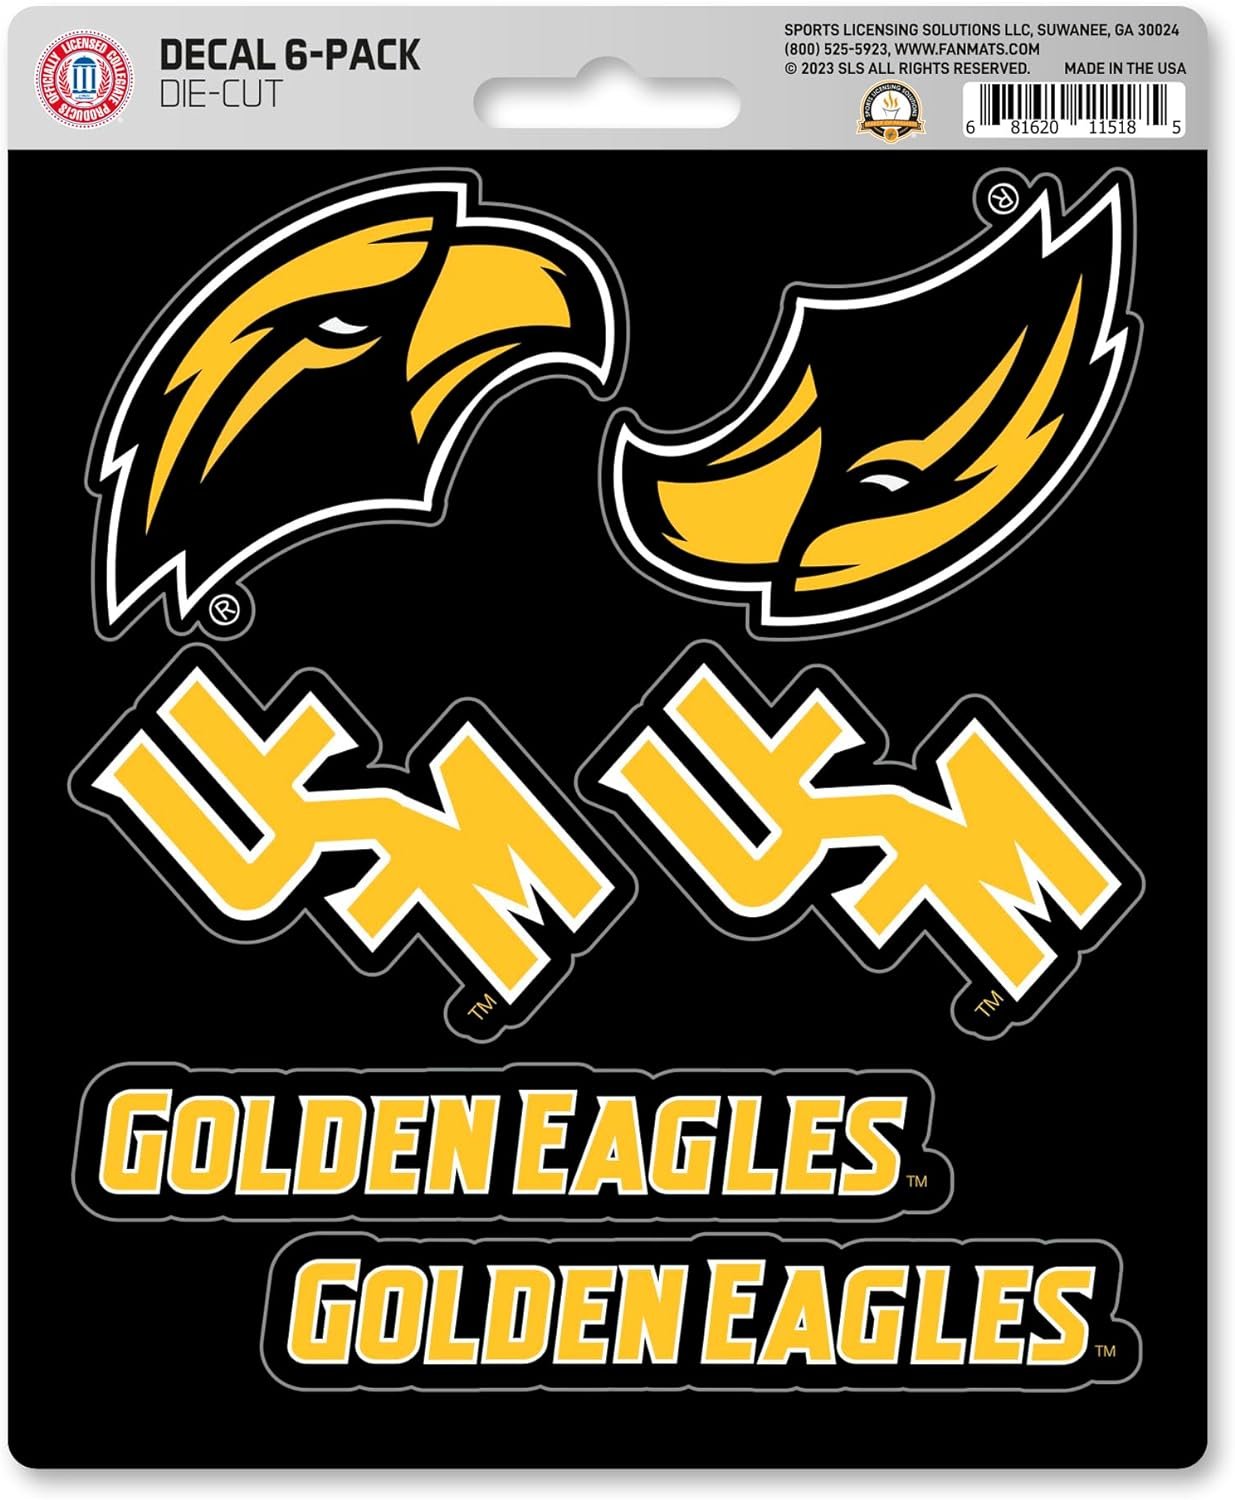 University of Southern Mississippi Golden Eagles 6-Piece Decal Sticker Set, 5x6 Inch Sheet, Gift for football fans for any hard surfaces around home, automotive, personal items